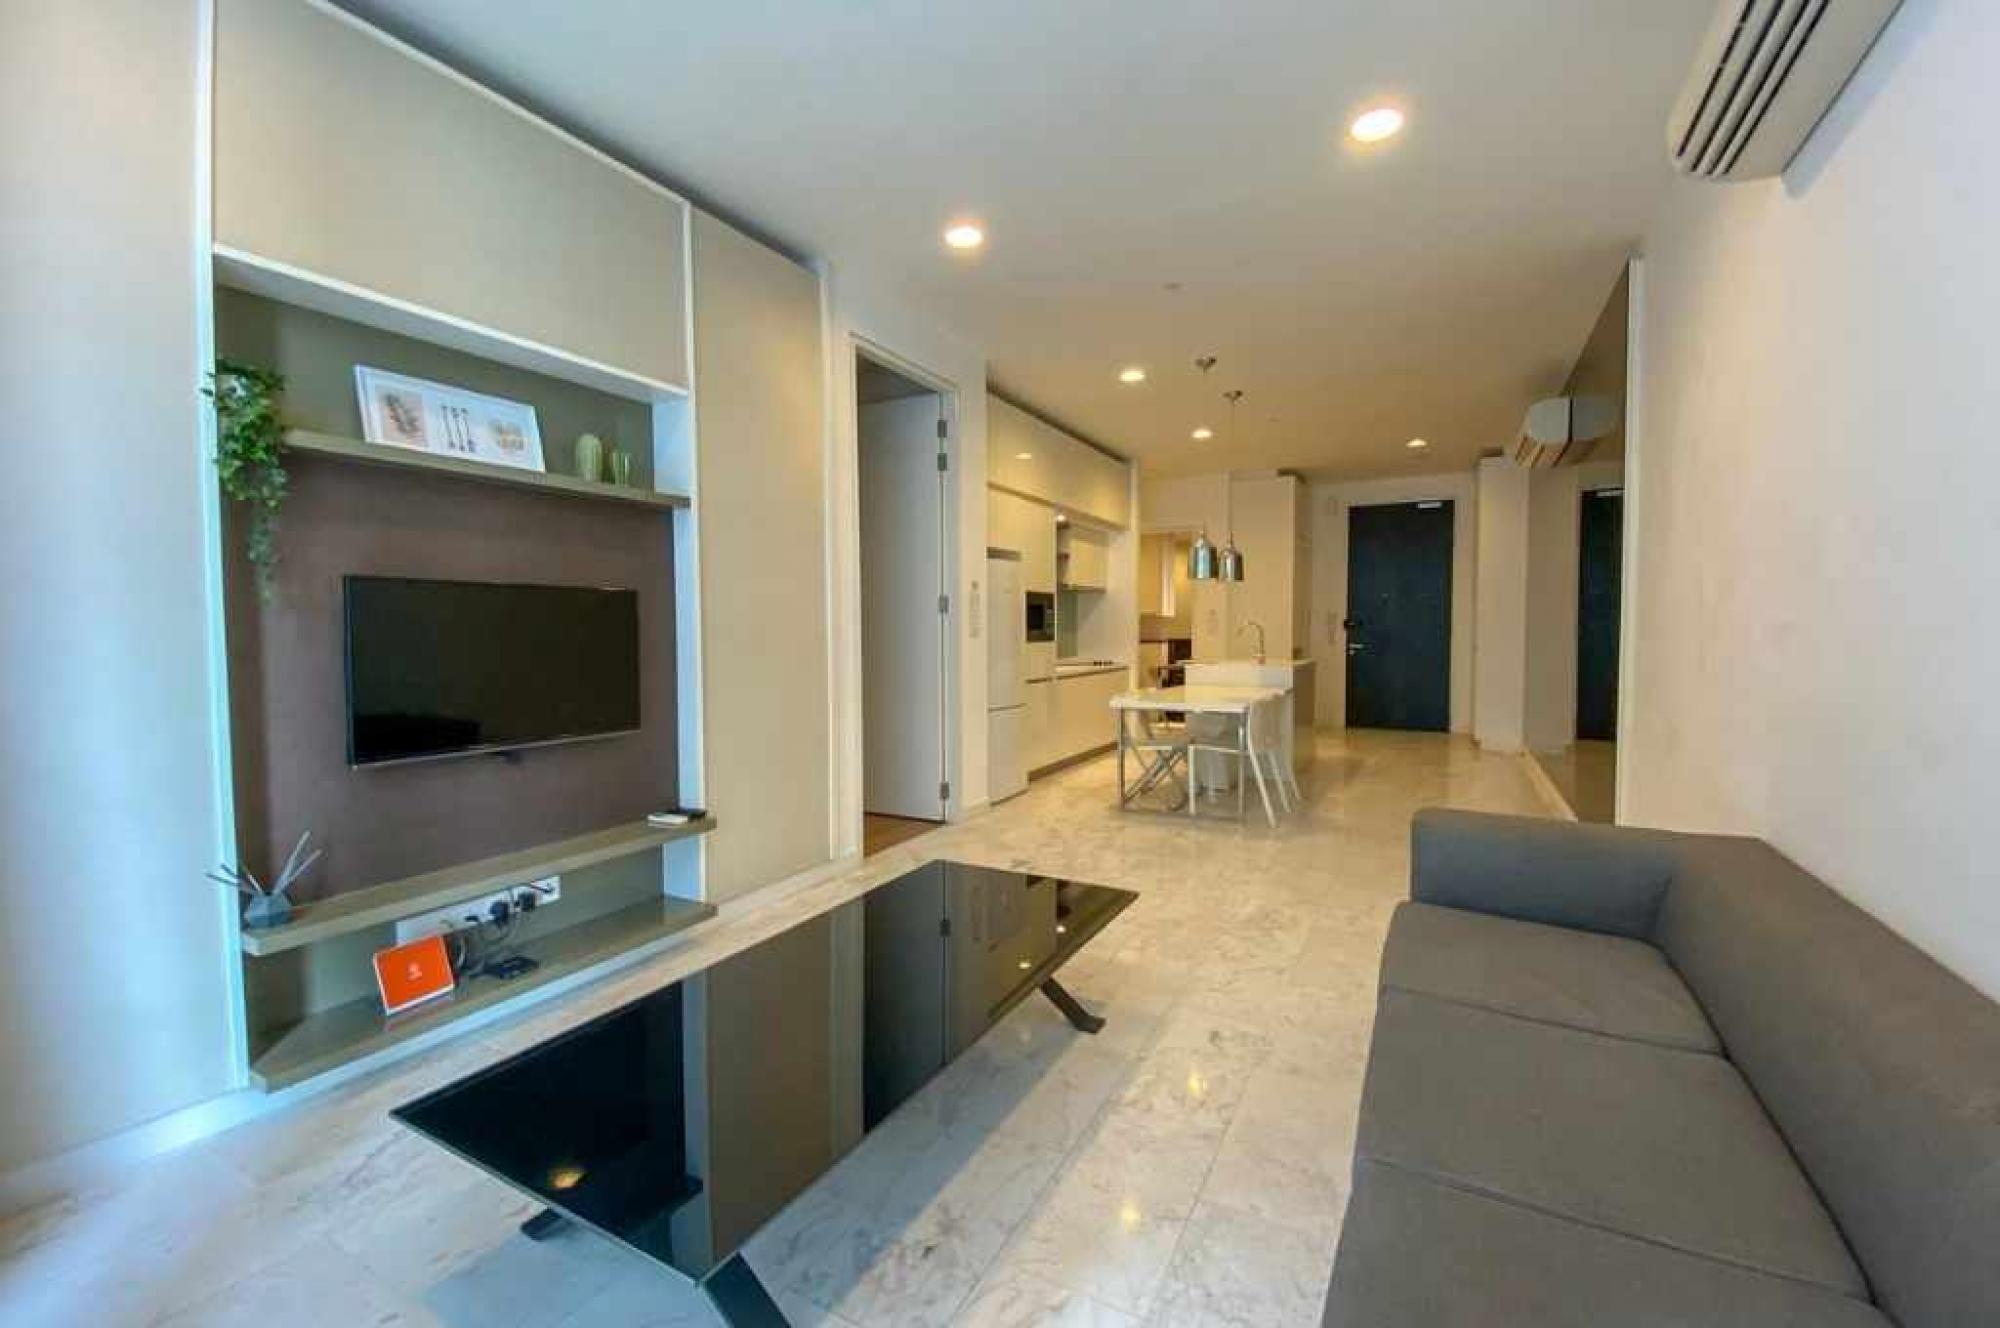 Property Image 2 - Fabulous Modern Apartment with Natural Light in Kuala Lumpur 